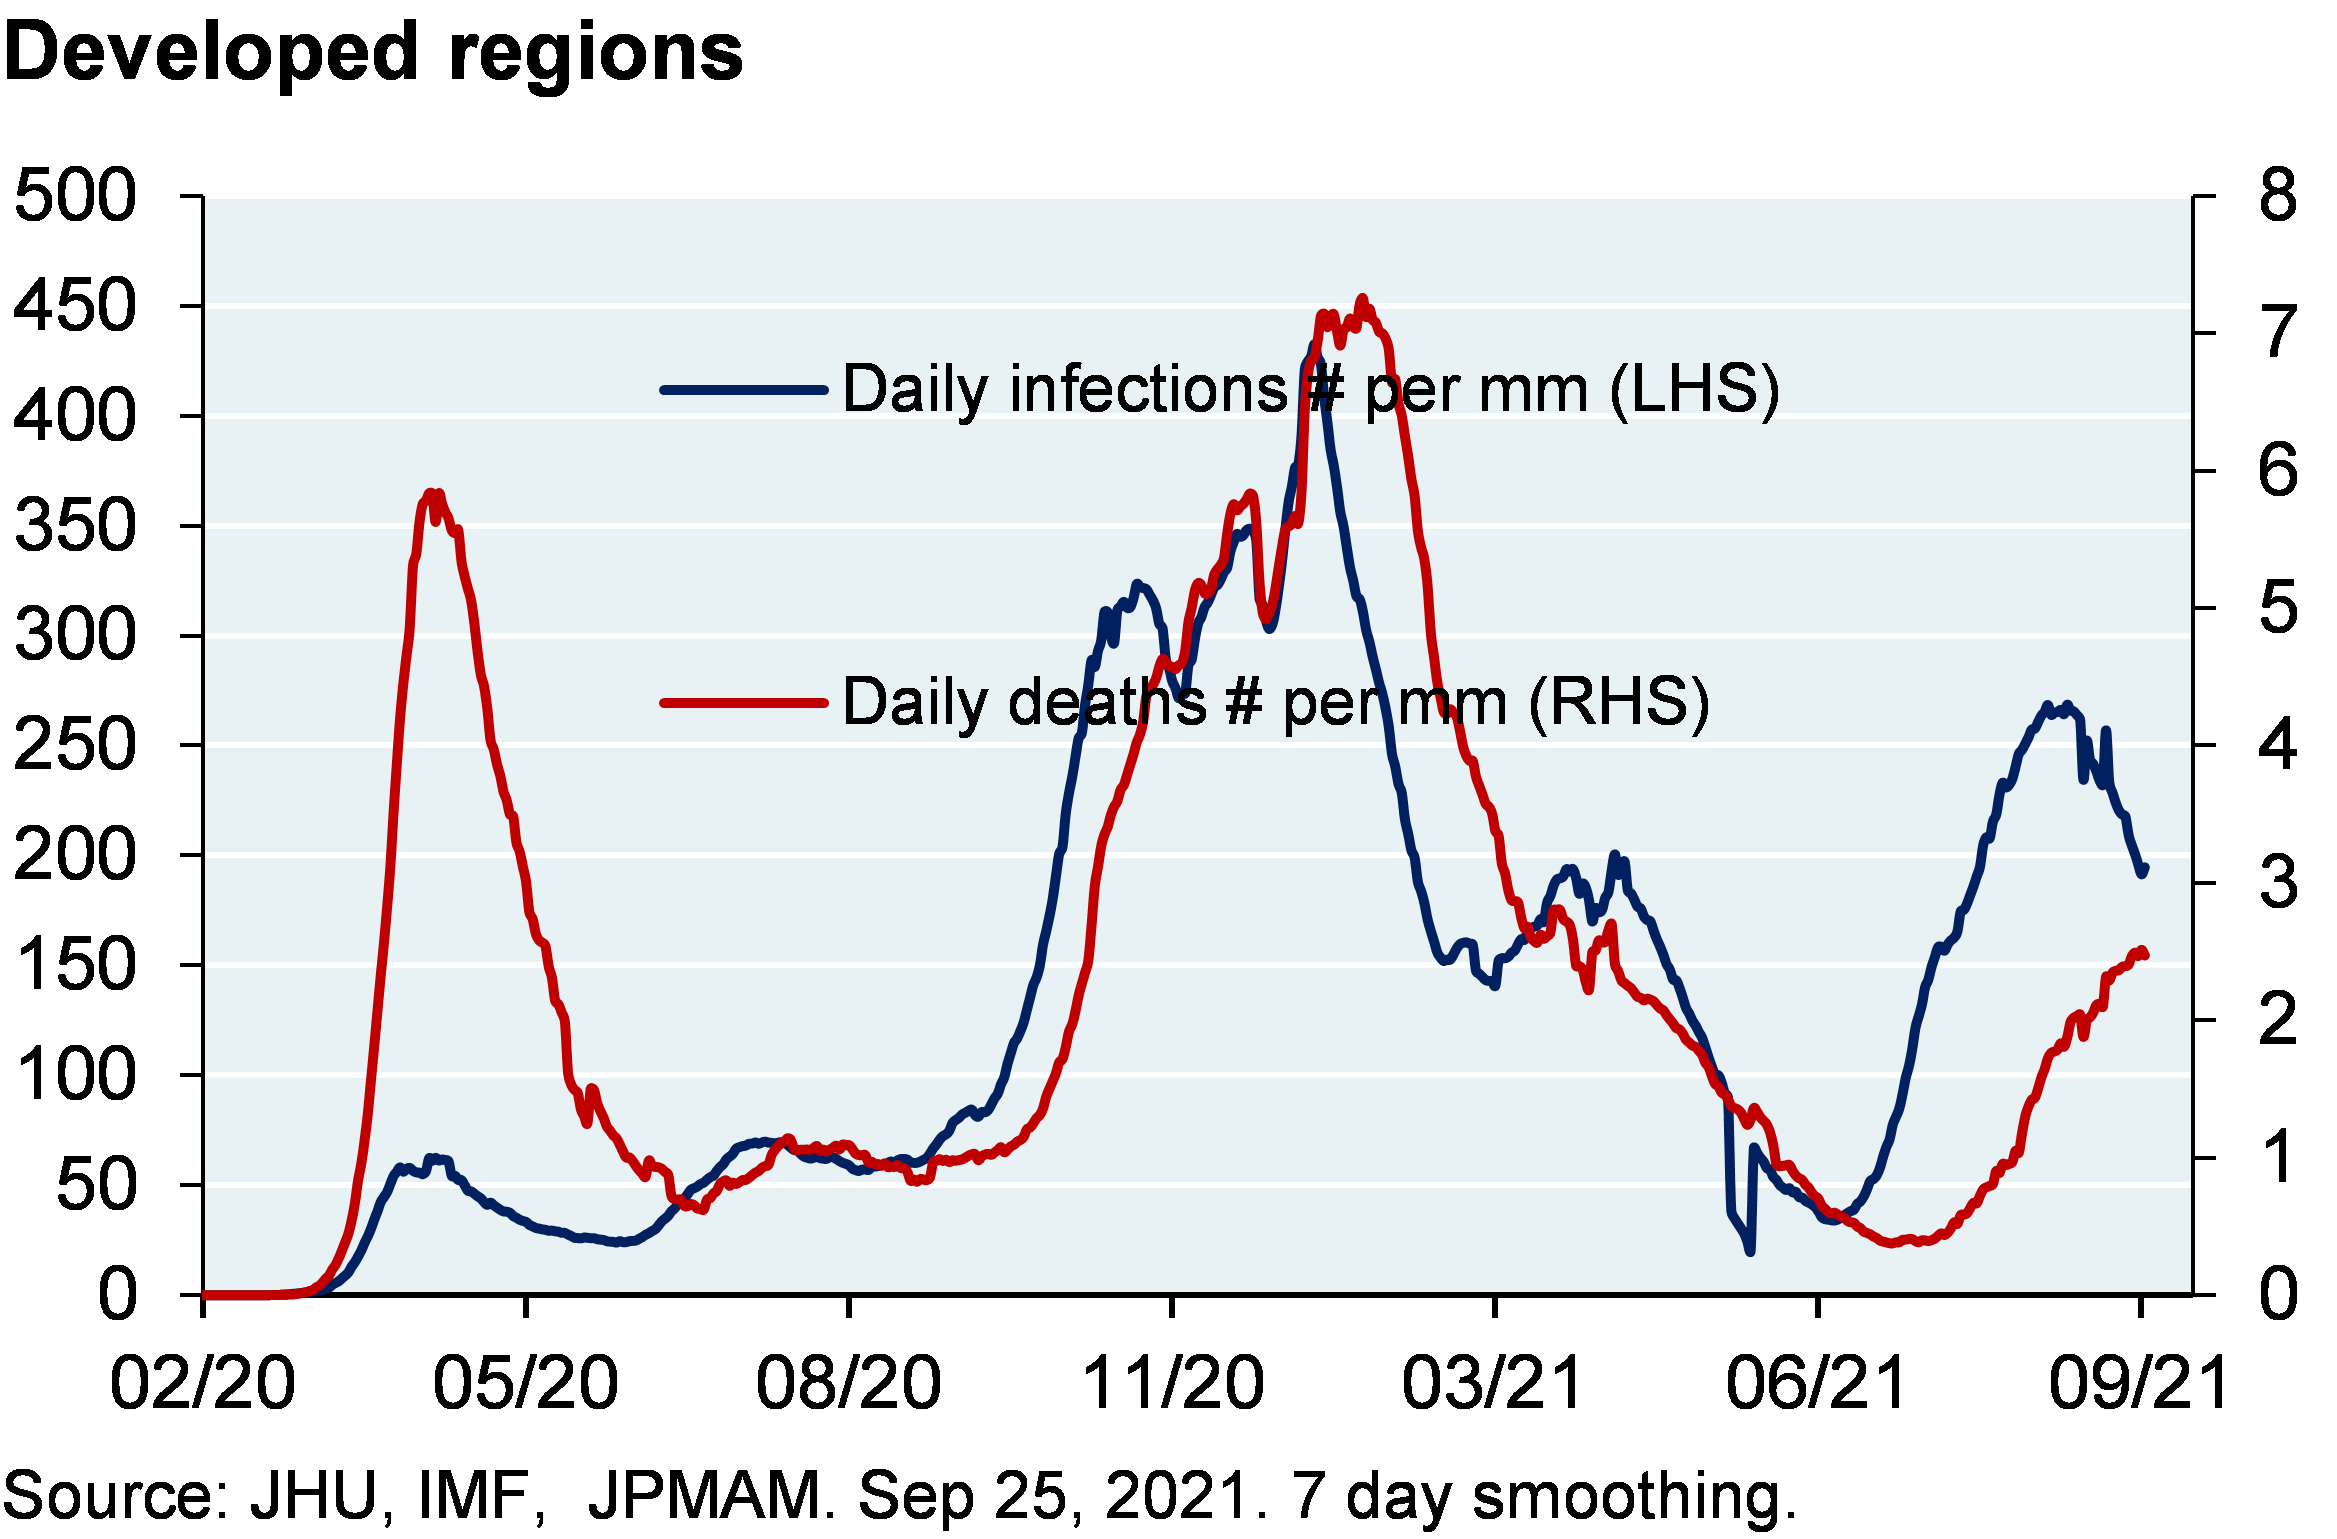 Line chart shows daily infections per million and daily deaths per million for the developed world. The rise in infections and mortality are much higher than was anticipated when the vaccination programs began. Daily infections are above 200 per mm and daily deaths are above 2 per mm.